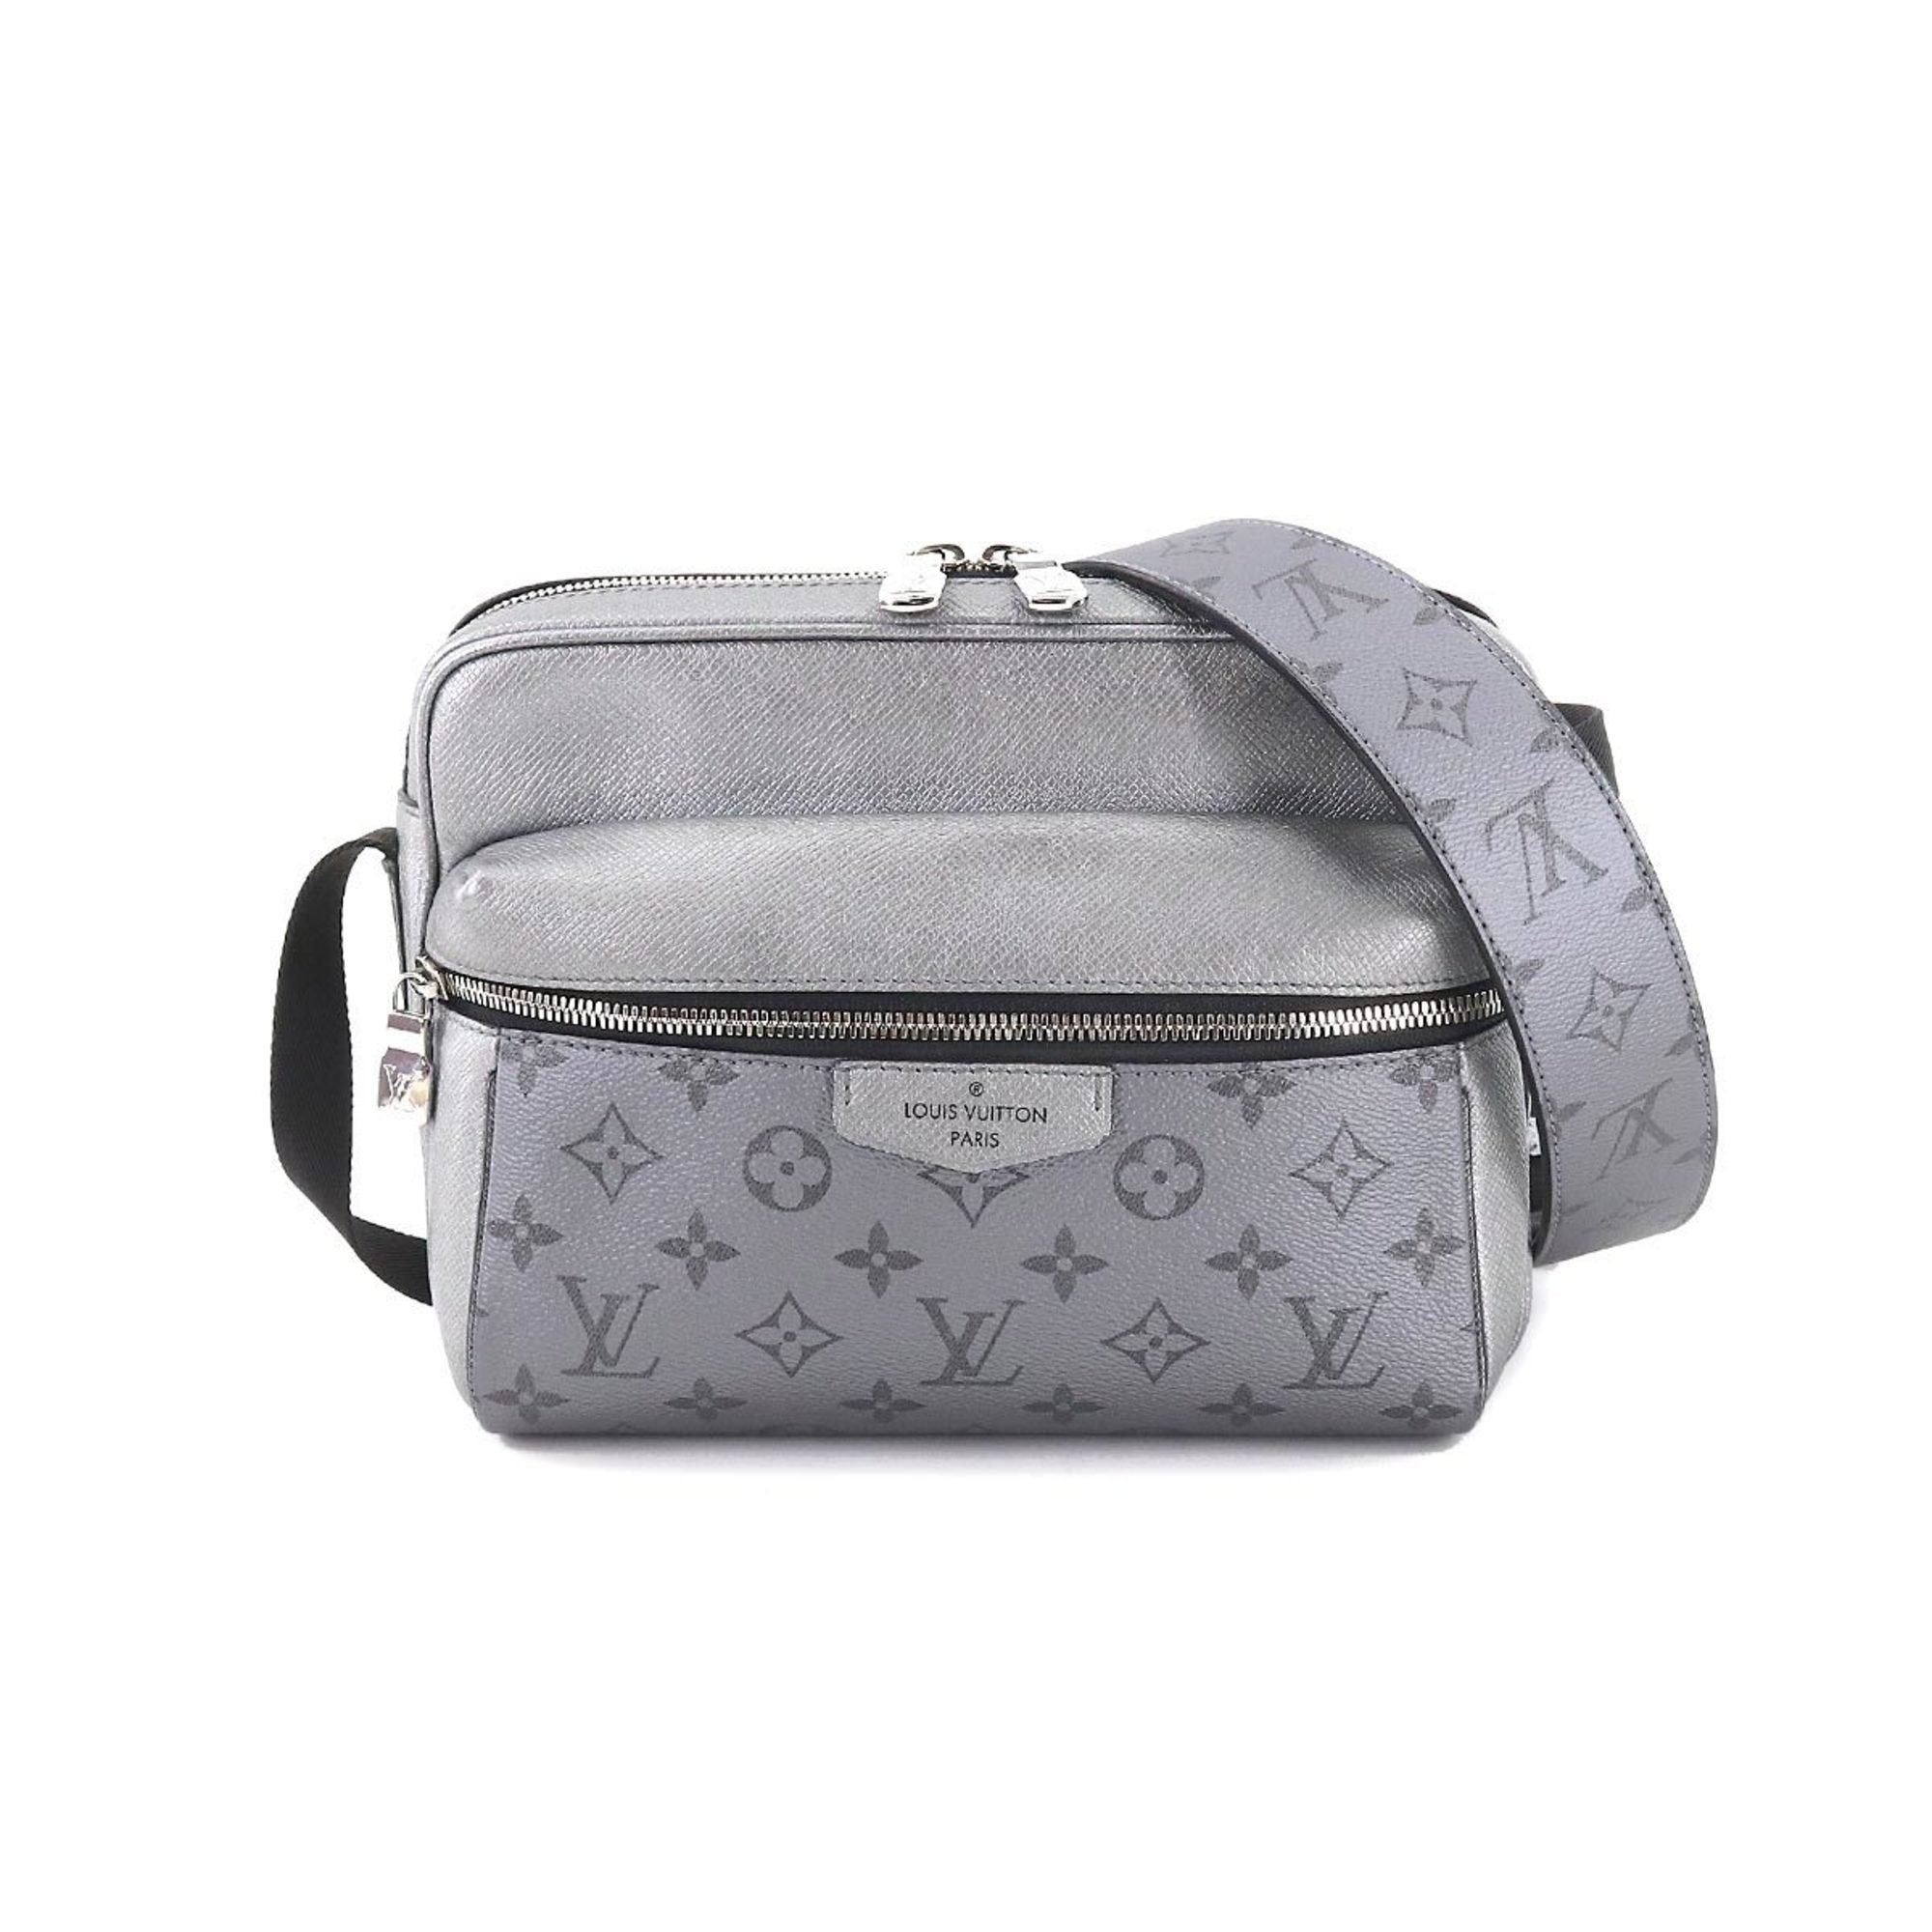 Auth LOUIS VUITTON Outdoor Sling Bag M30833 Silver Taigarama - RFID TAG  Backpack